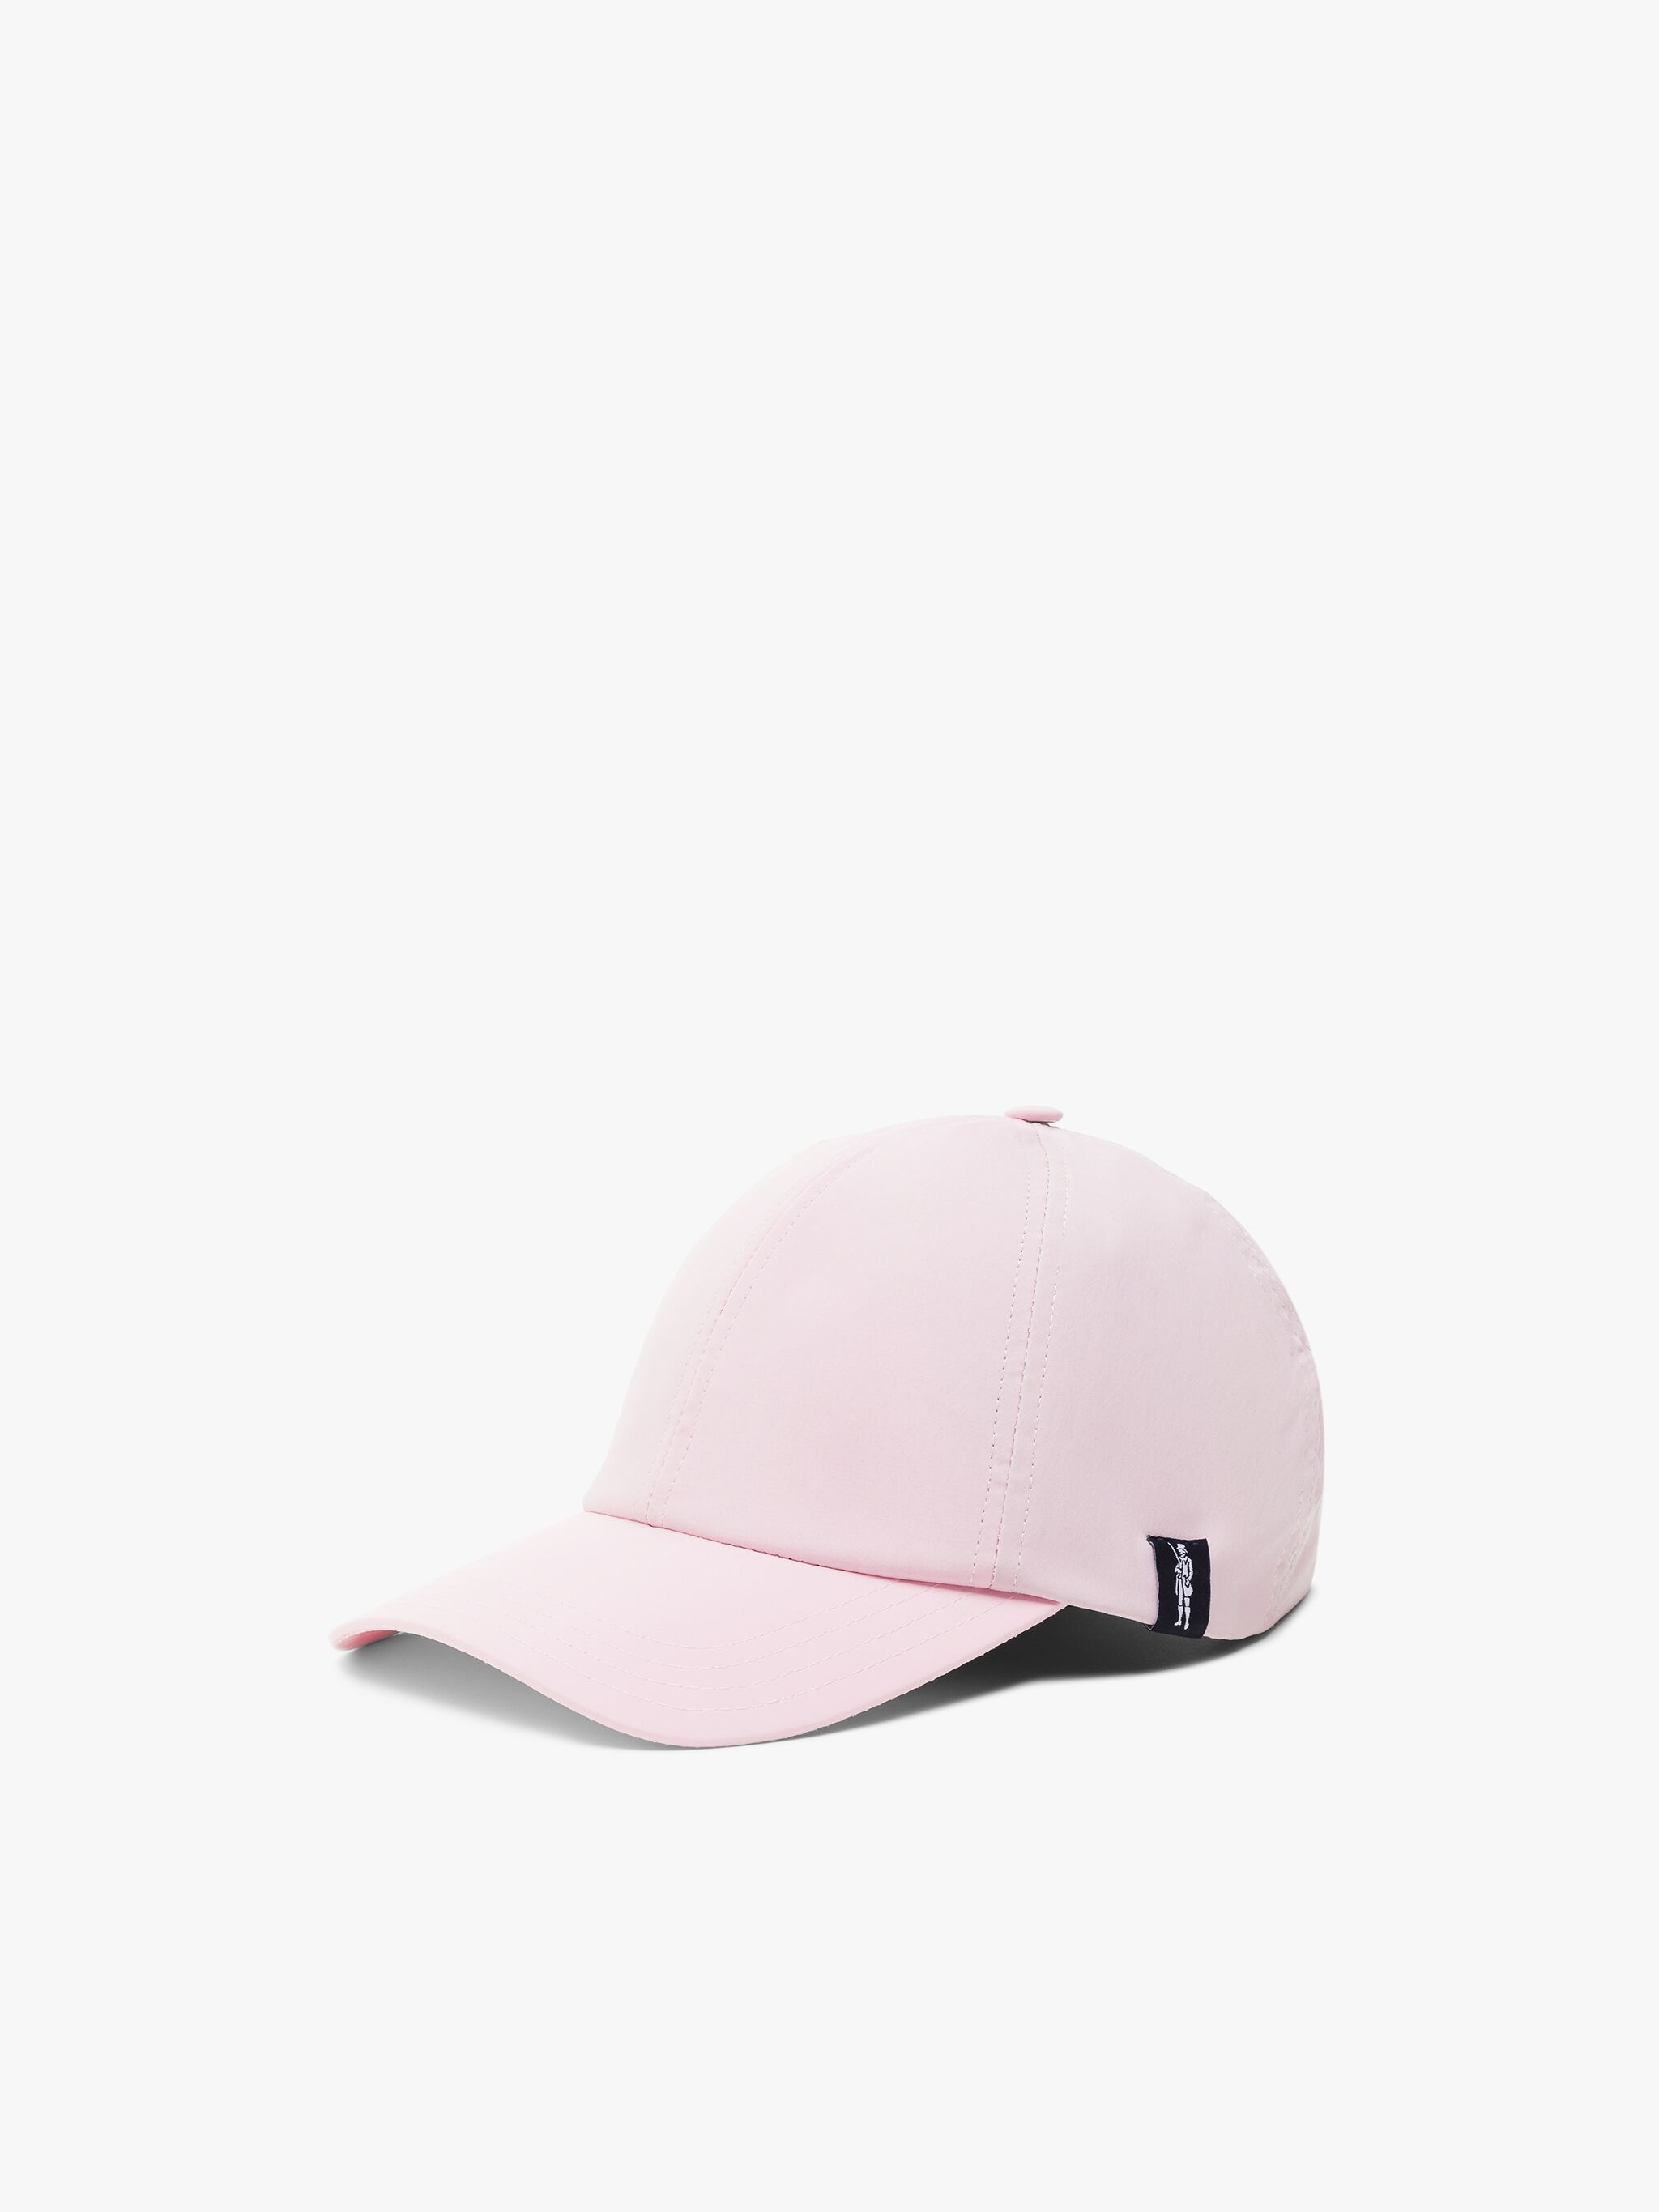 TIPPING PINK ECO DRY BASEBALL CAP - 1